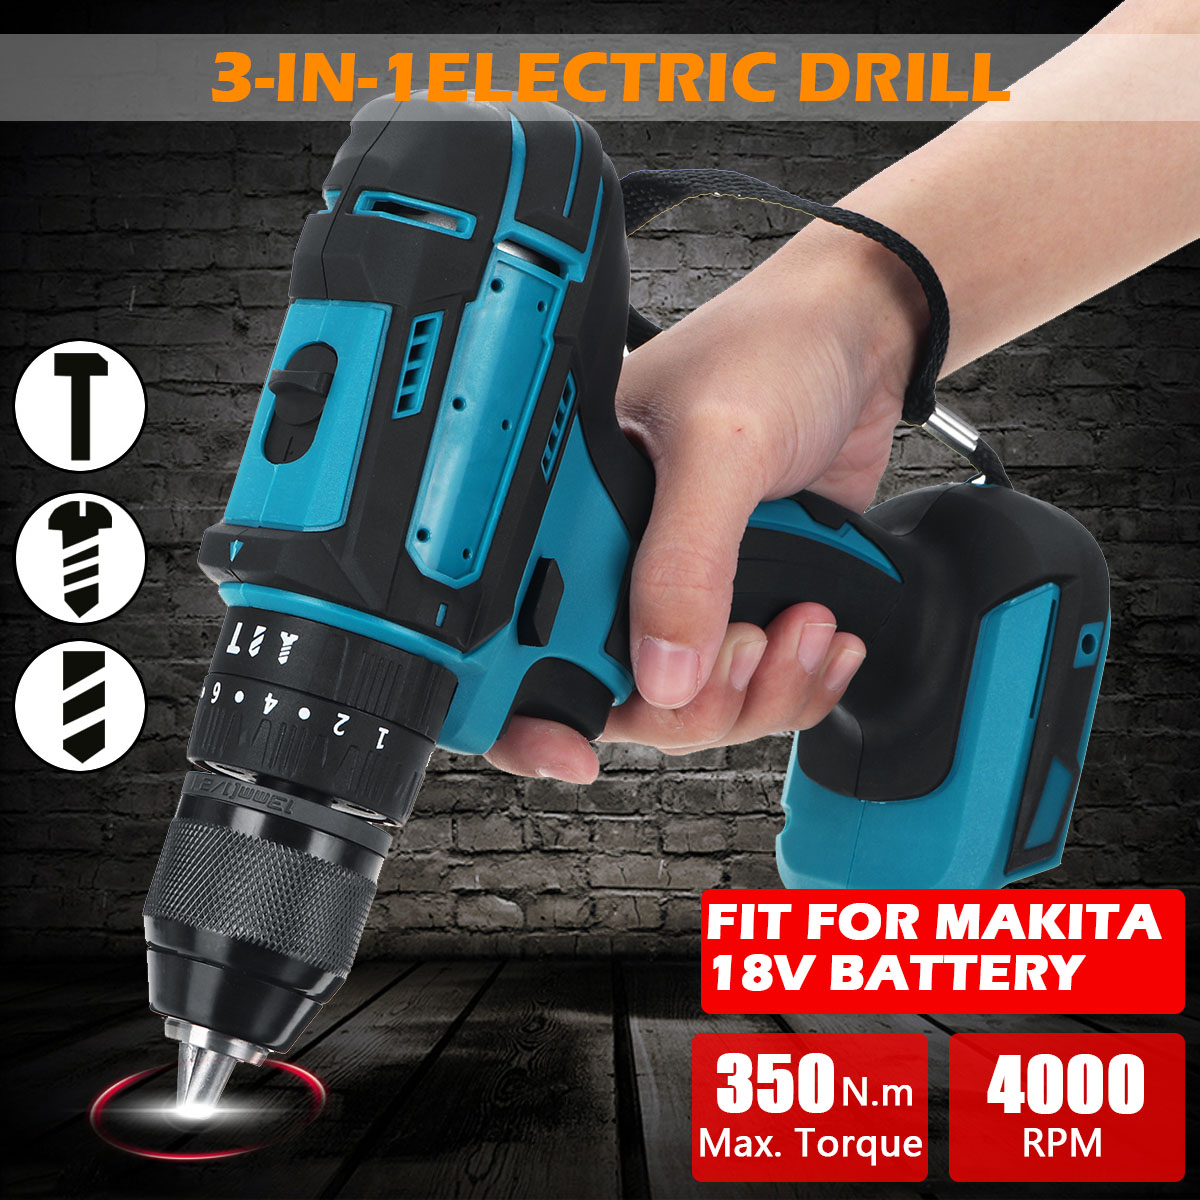 10mm-Chuck-Impact-Drill-350Nm-Cordless-Electric-Drill-For-Makita-18V-Battery-4000RPM-LED-Light-Power-1642853-3